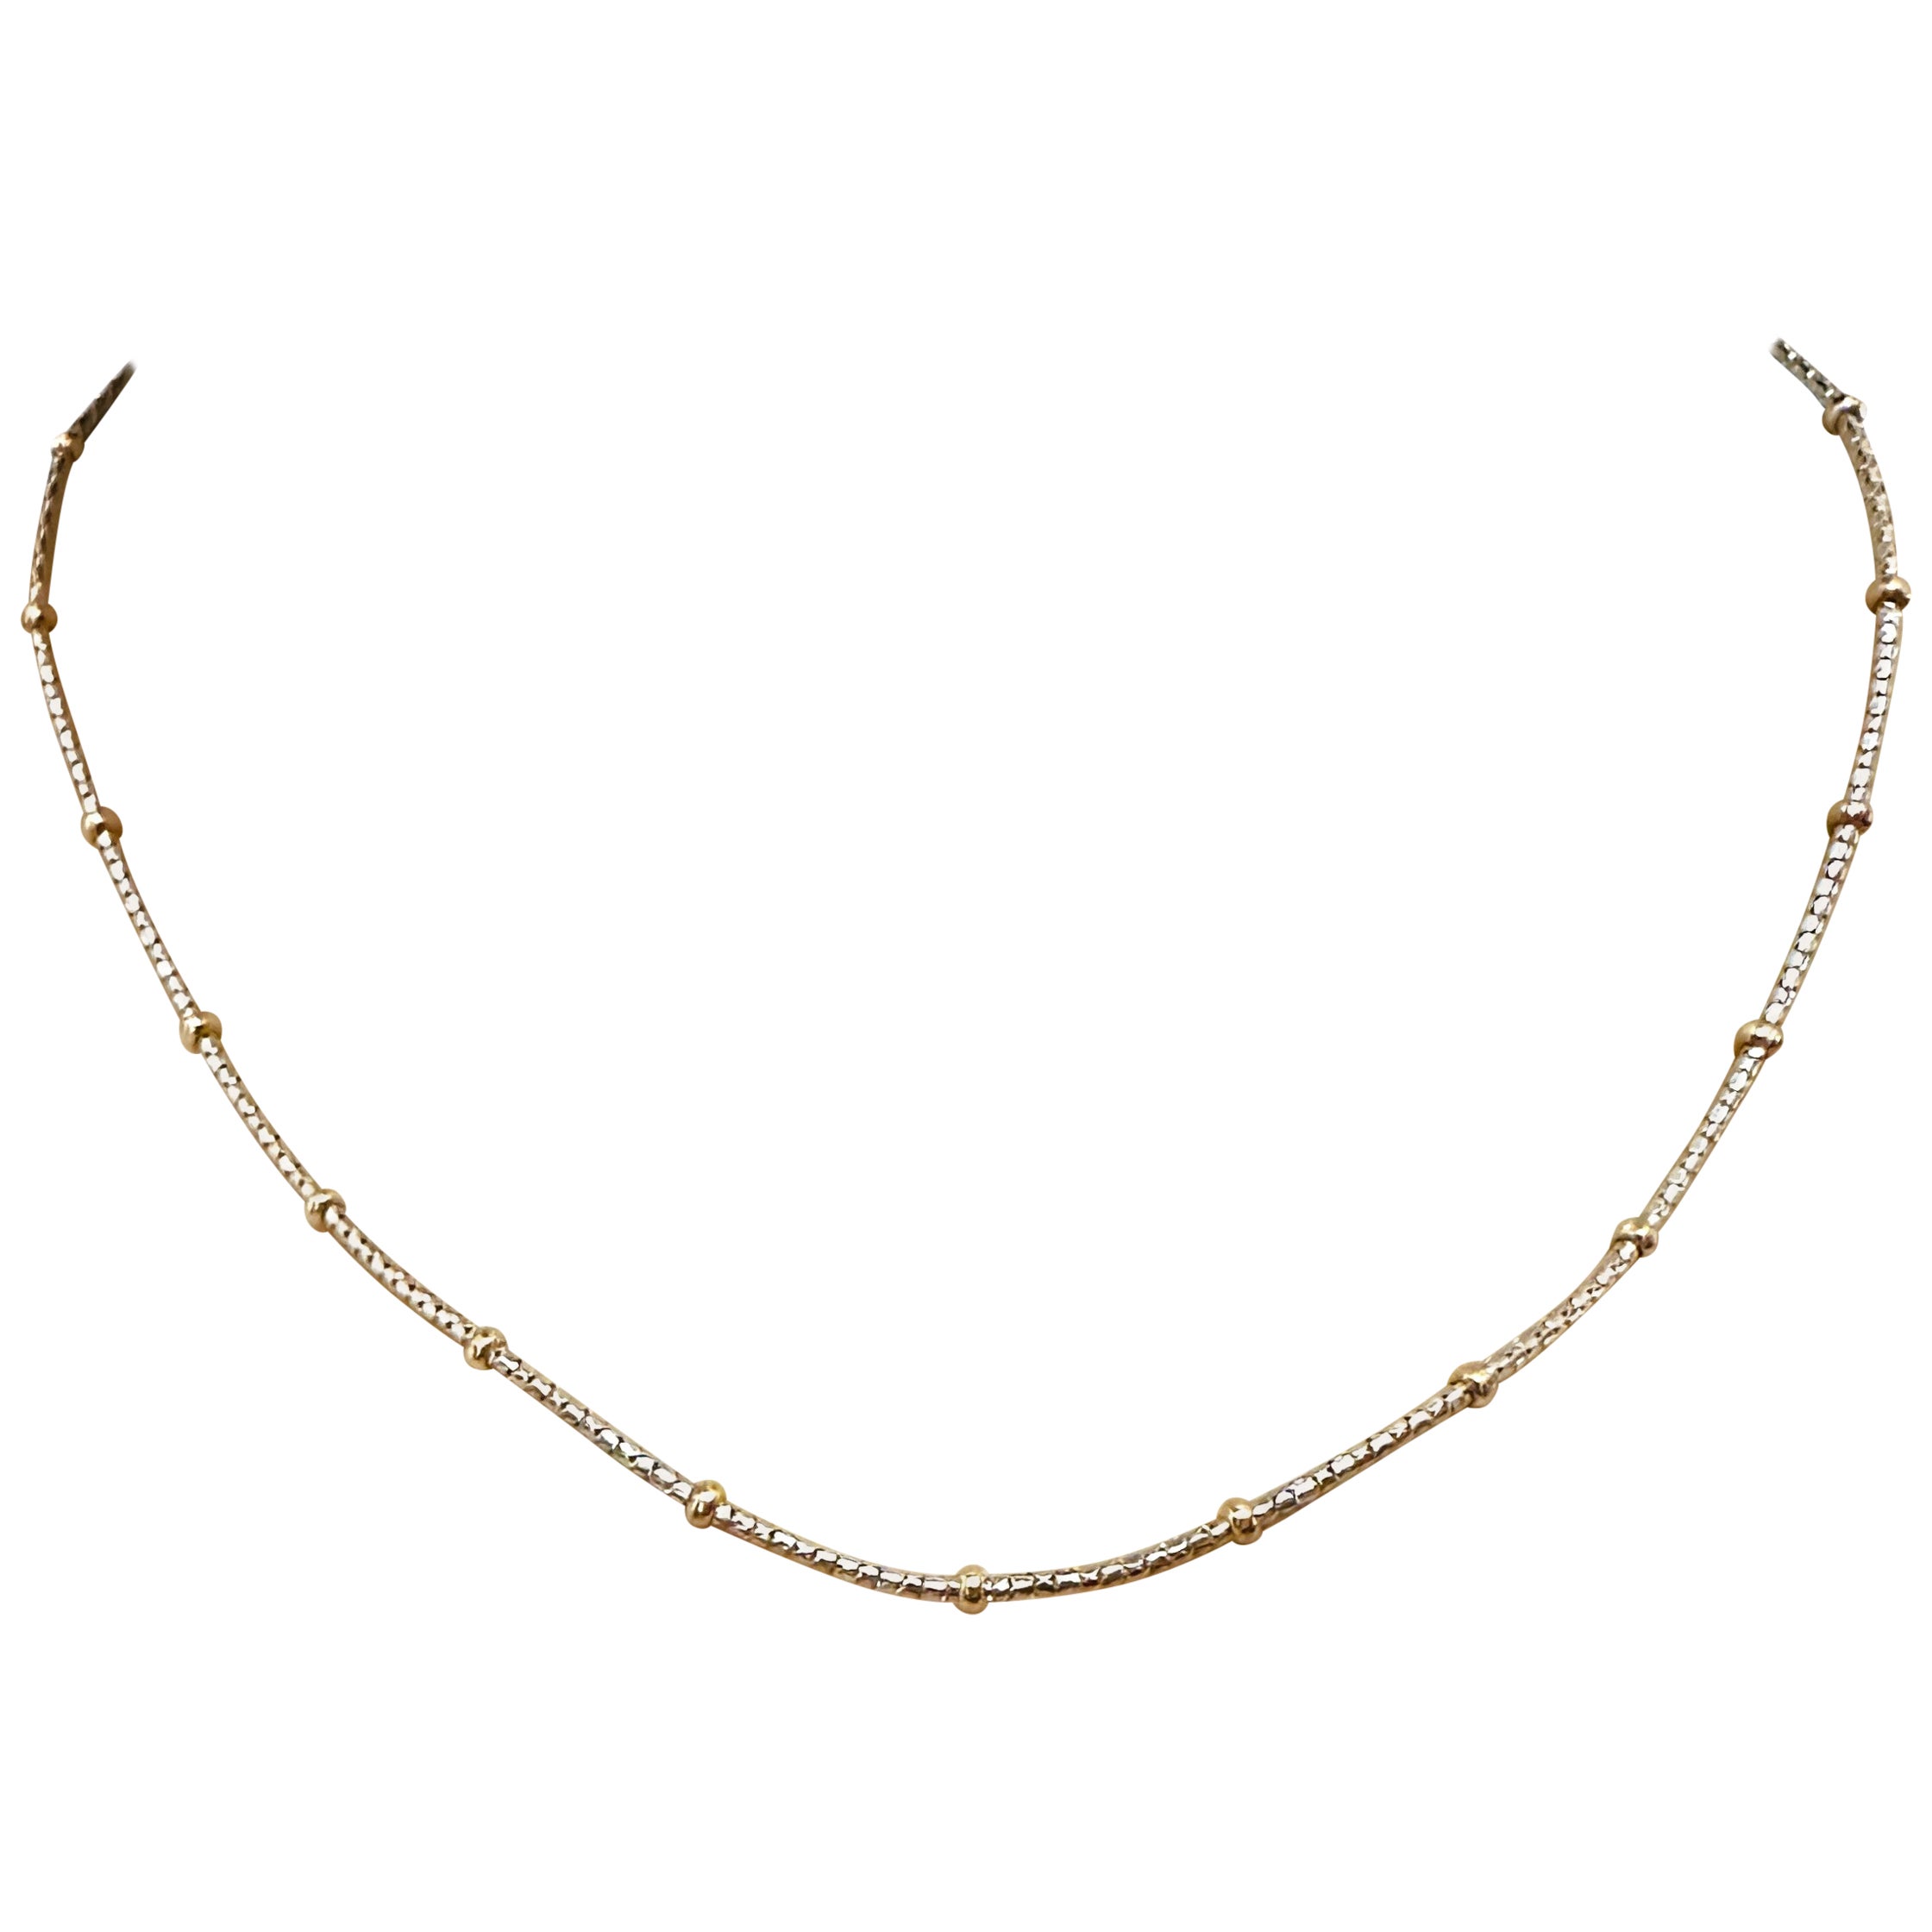 Kitsinian 14k White Gold with 14K Yellow Gold Beaded Necklace 16" - Stamped